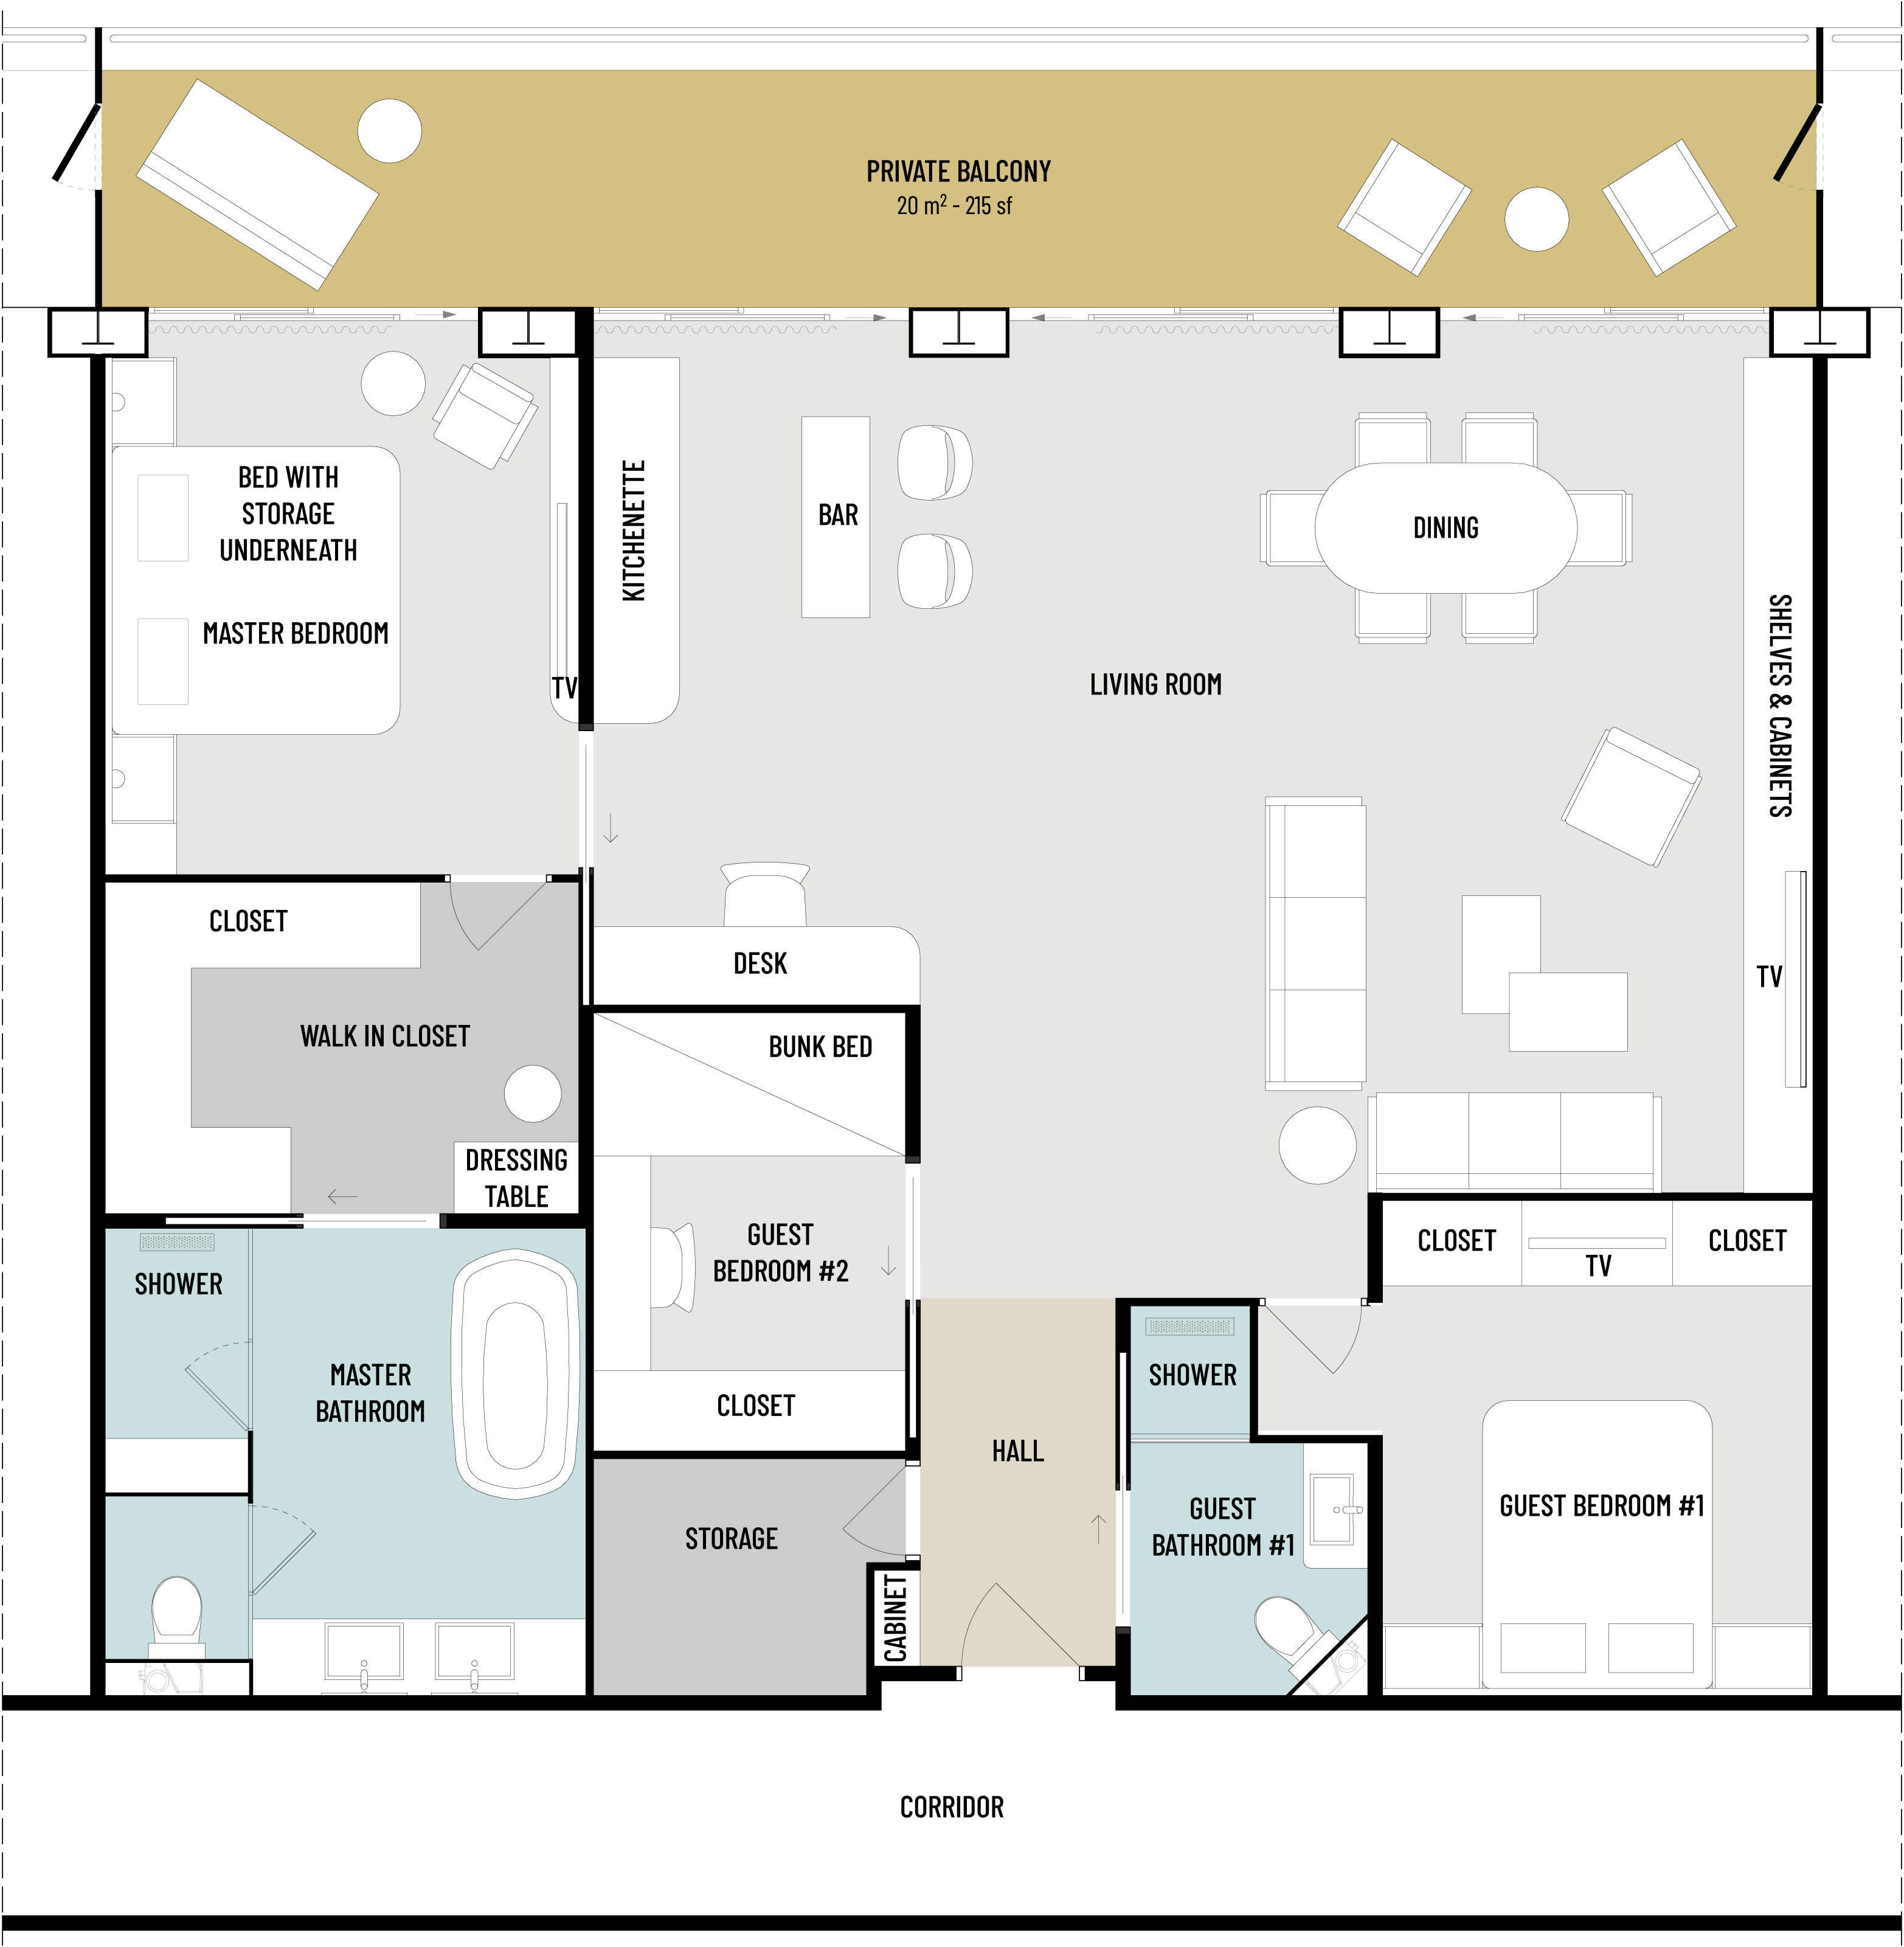 Floorplan of RU5.1 cruise ship apartment showing living room, bunk bed, home office, master bedroom, guest bedrooms, bathrooms and balcony